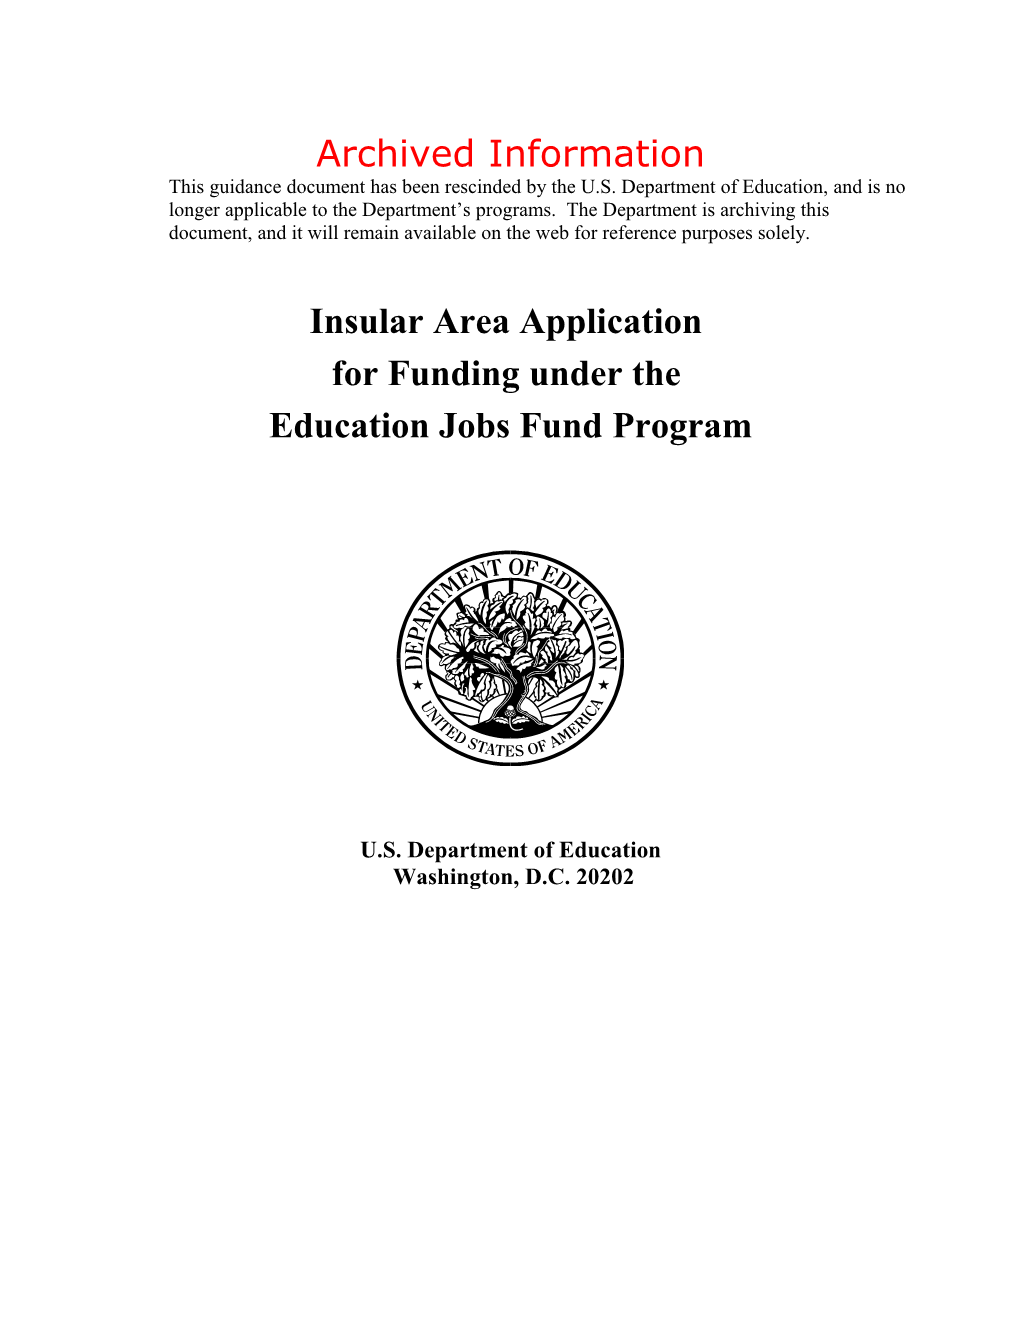 Archived: Application for Initial Funding Under the State Fiscal Stabilization Fund Program